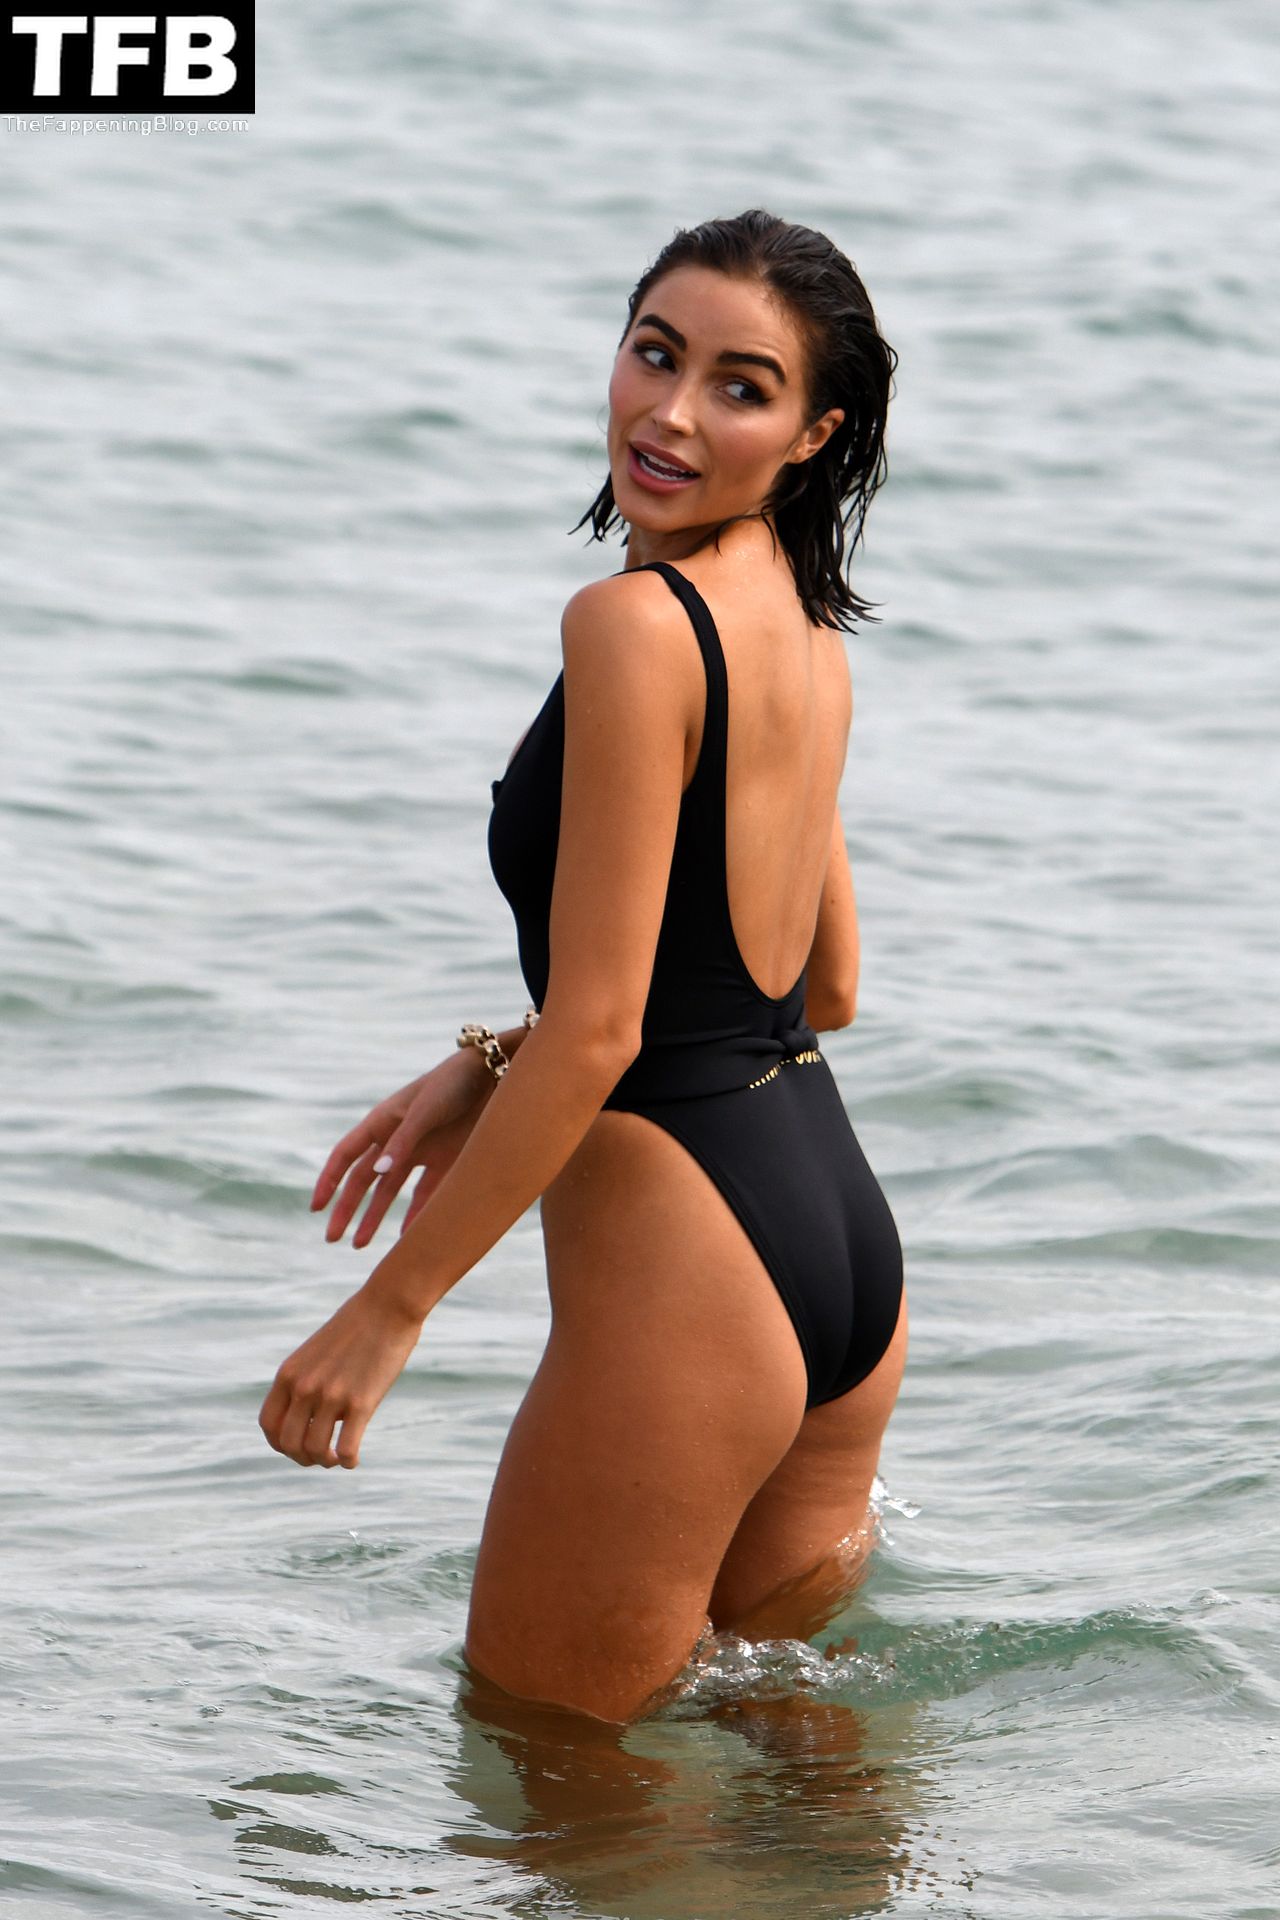 Olivia Culpo Looks Stunning in a Black Swimsuit on the Beach in Miami (83 Photos)